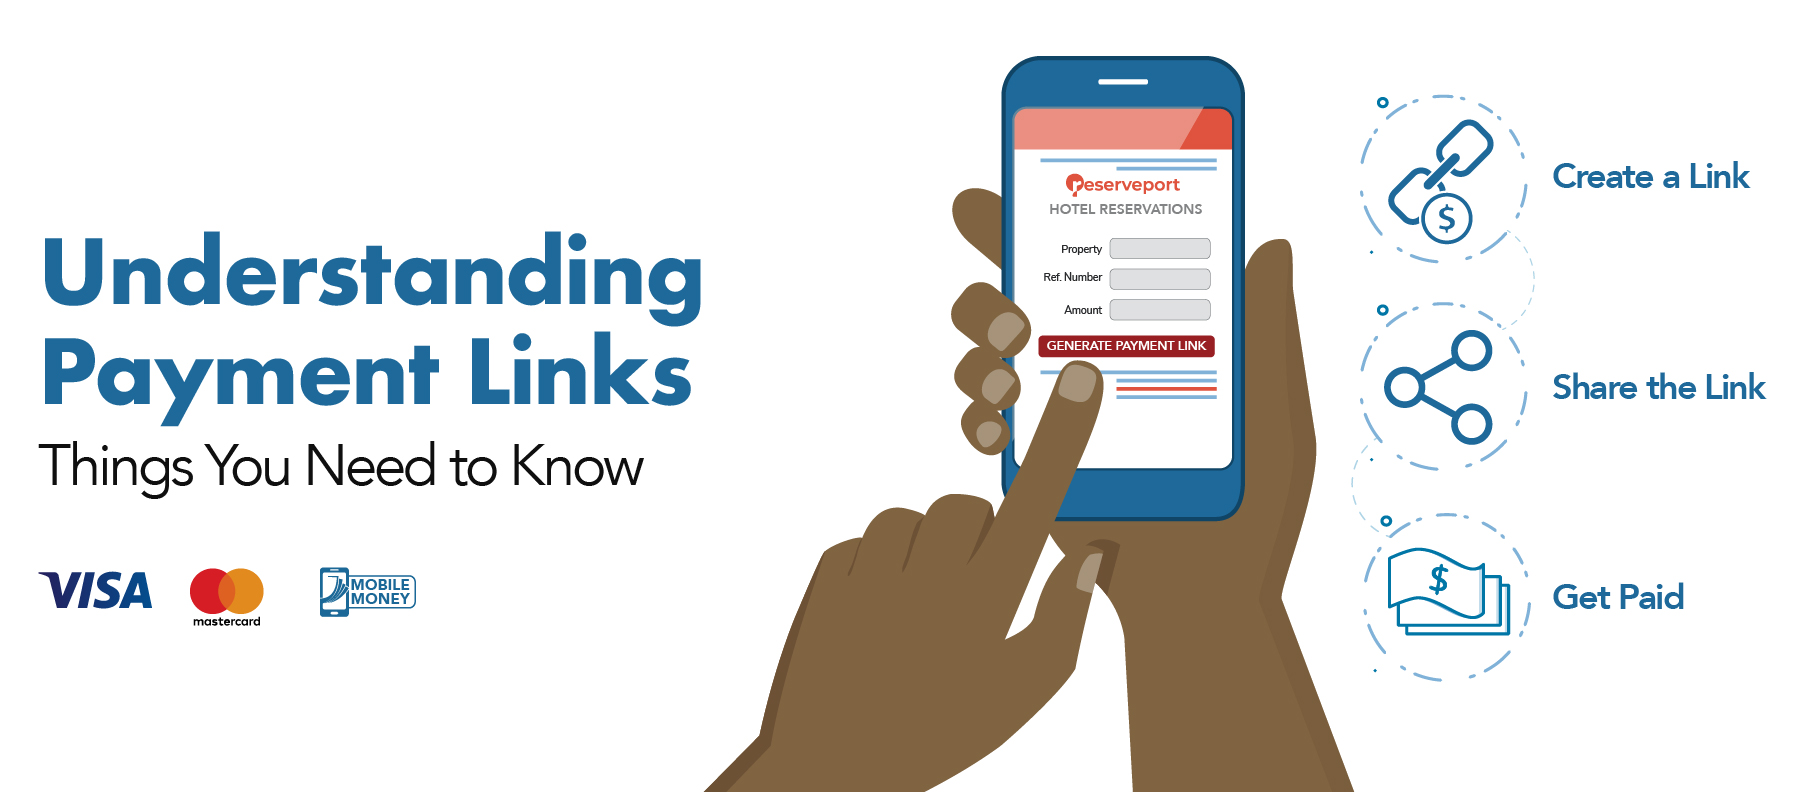 Understanding Payment Links: Things You Need to Know